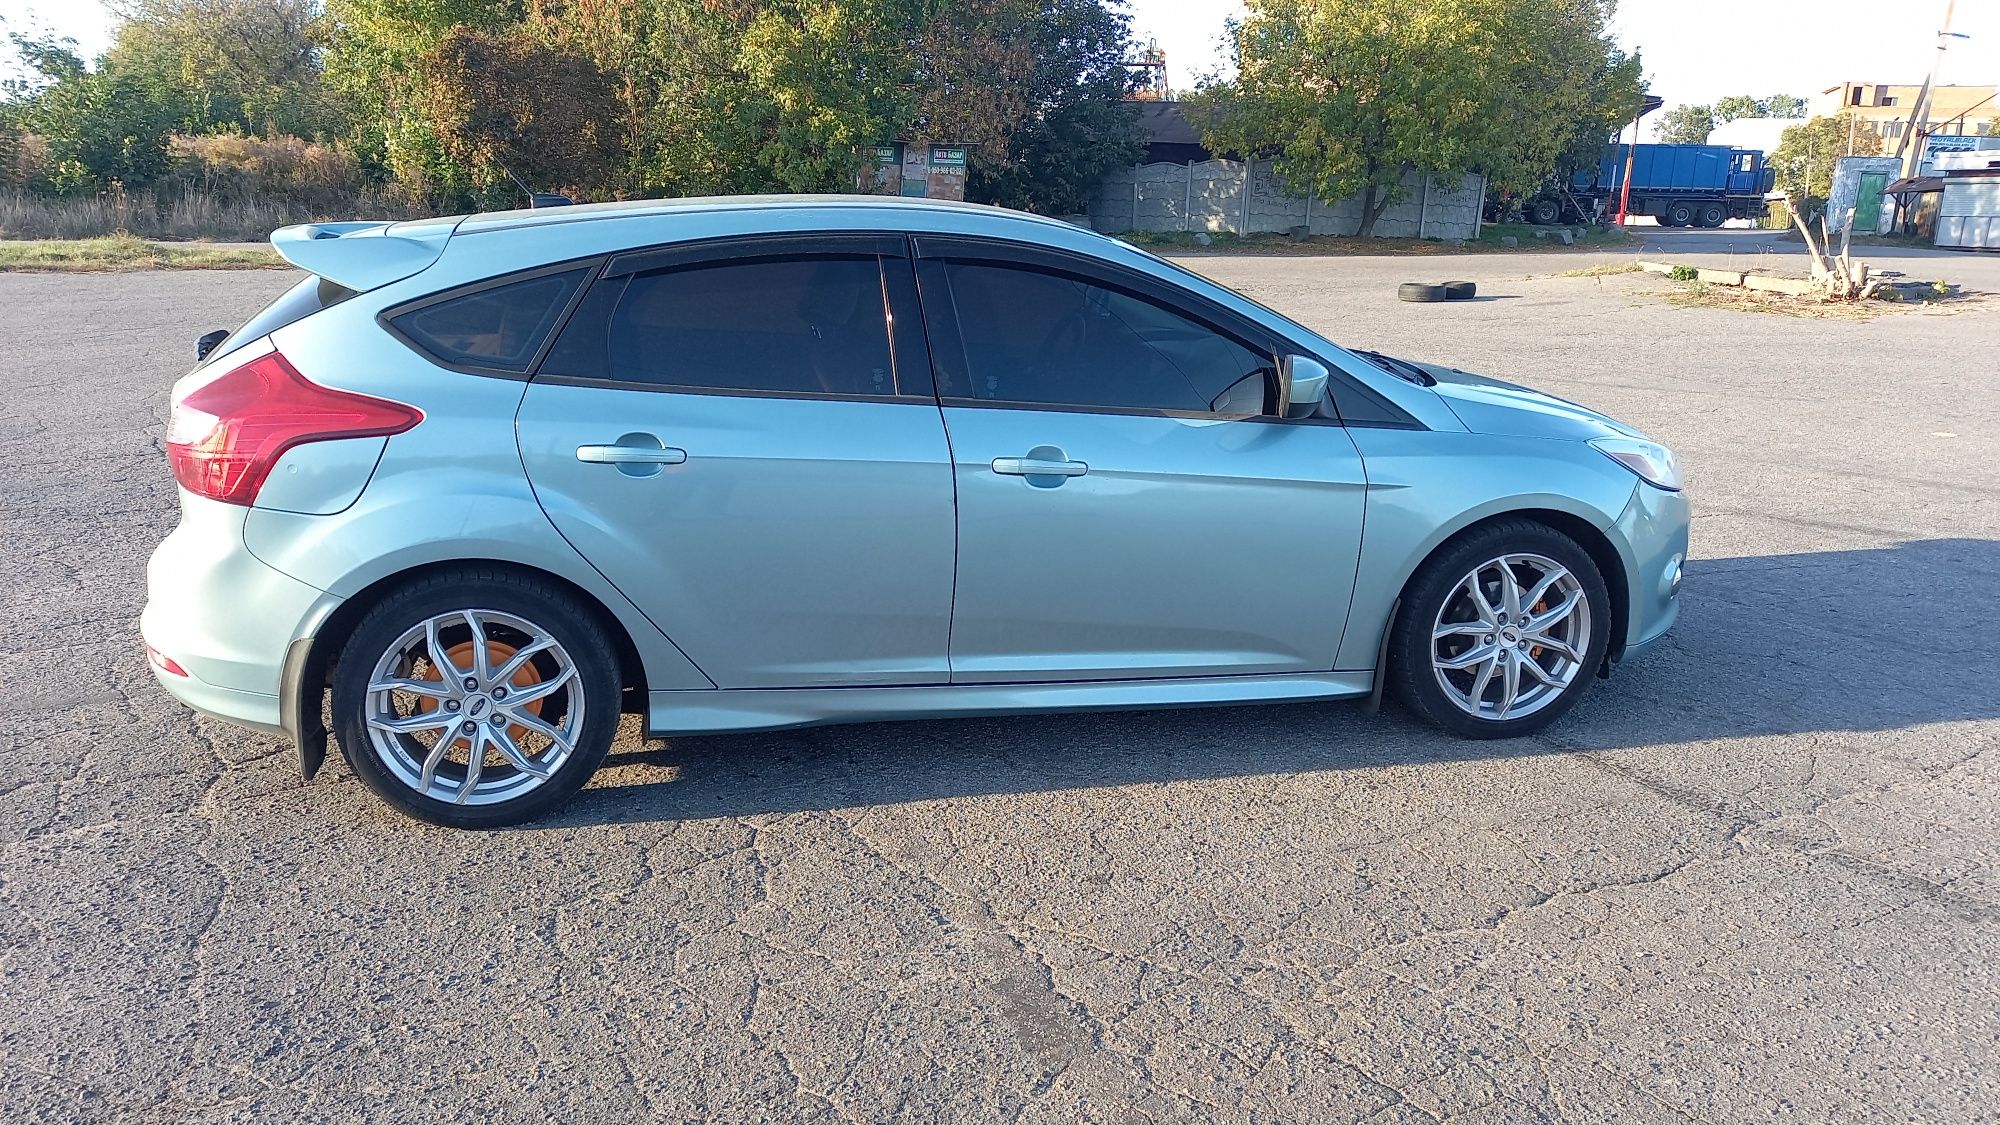 Форд фокус мкlll Ford focus